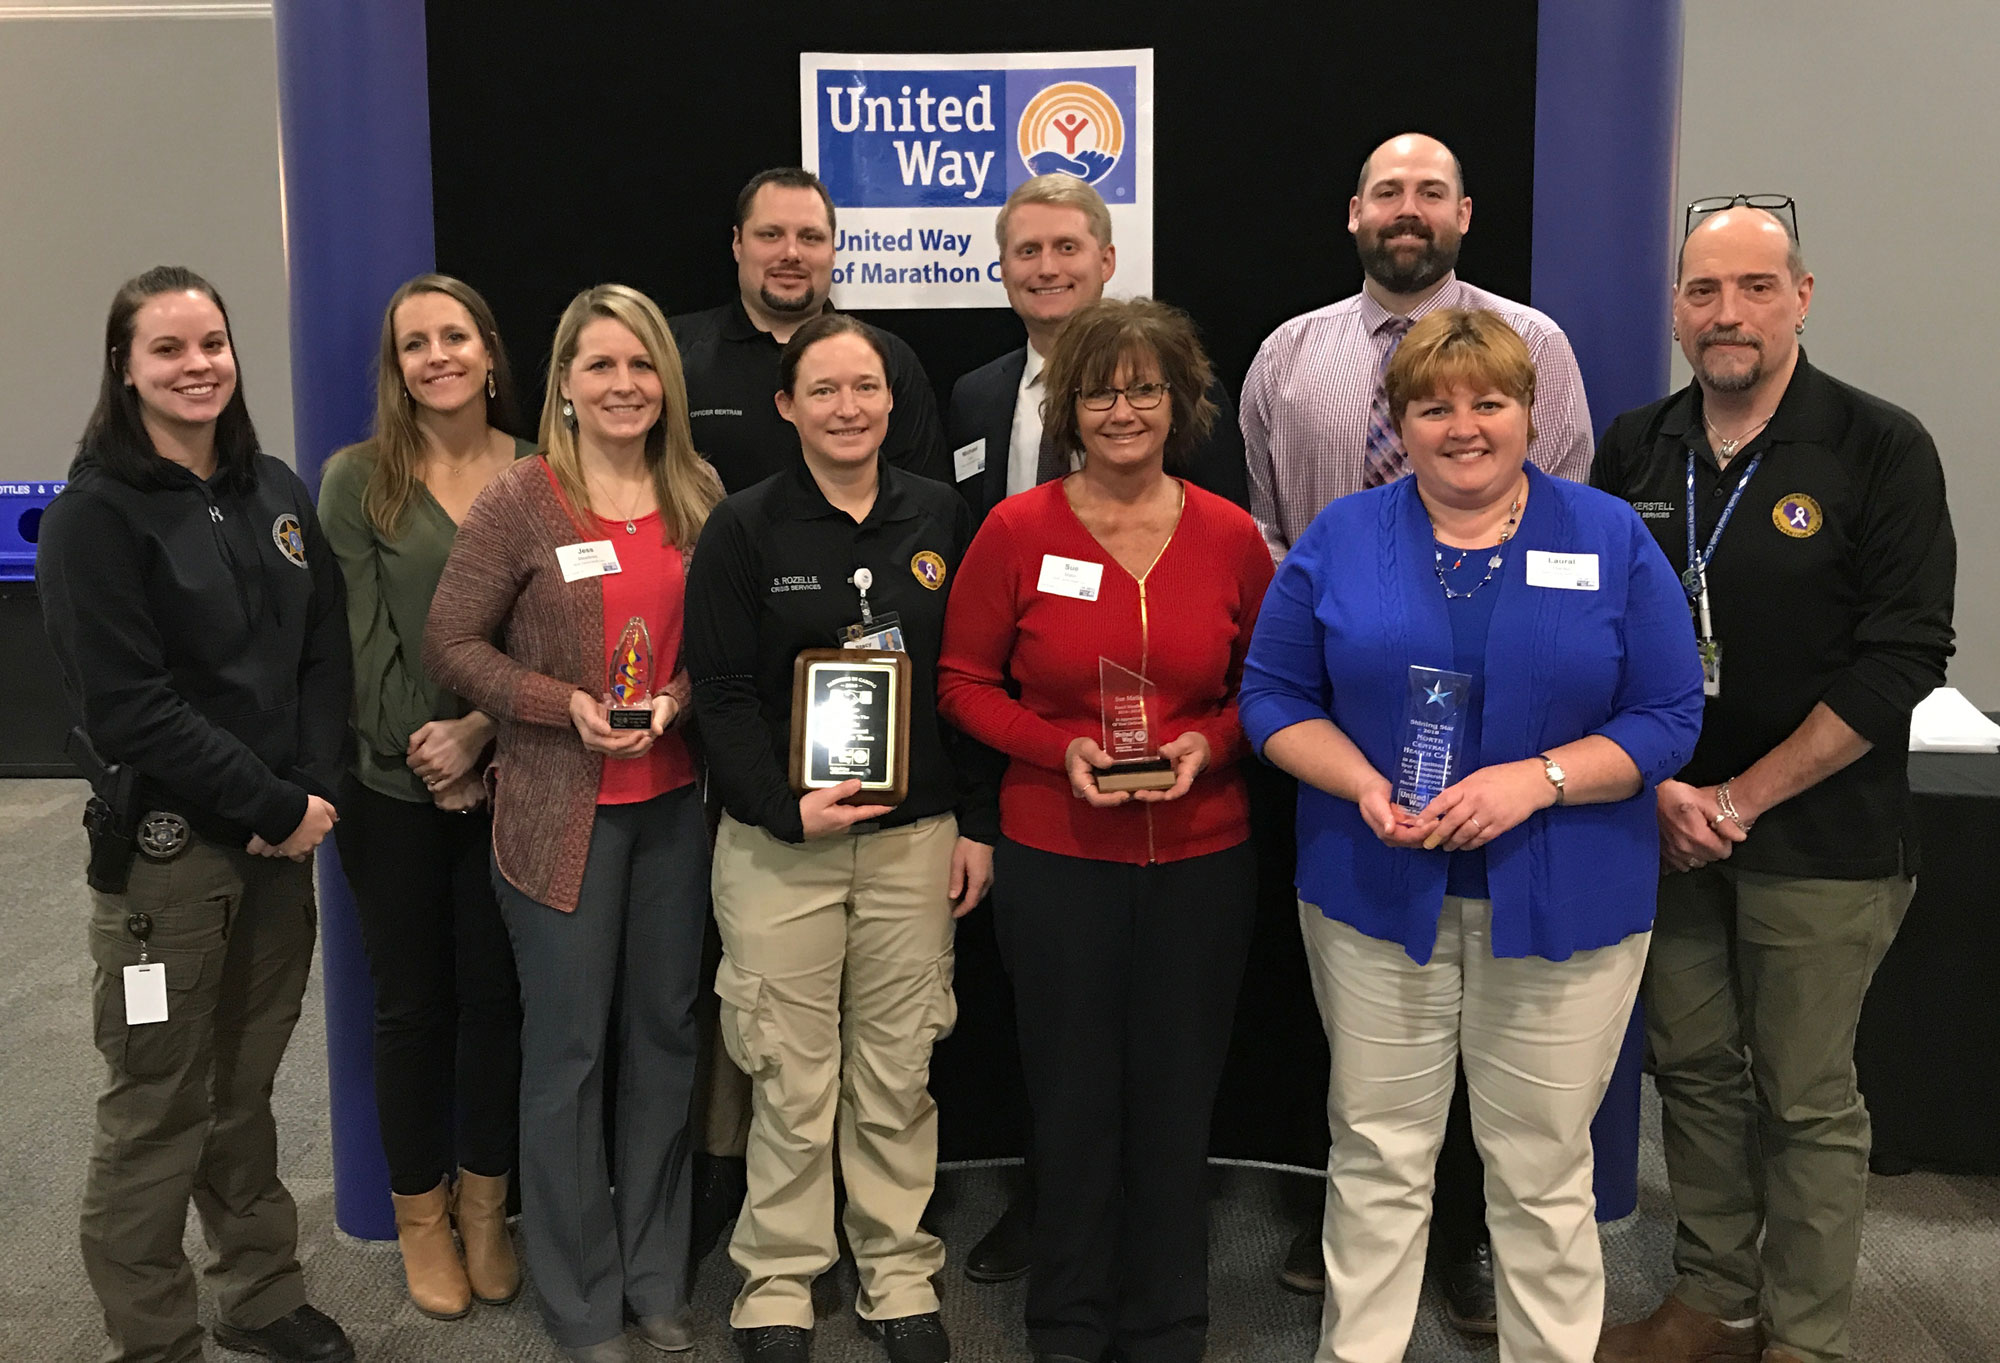 North Central Health Care and Staff Recognized at United Way Annual Luncheon 